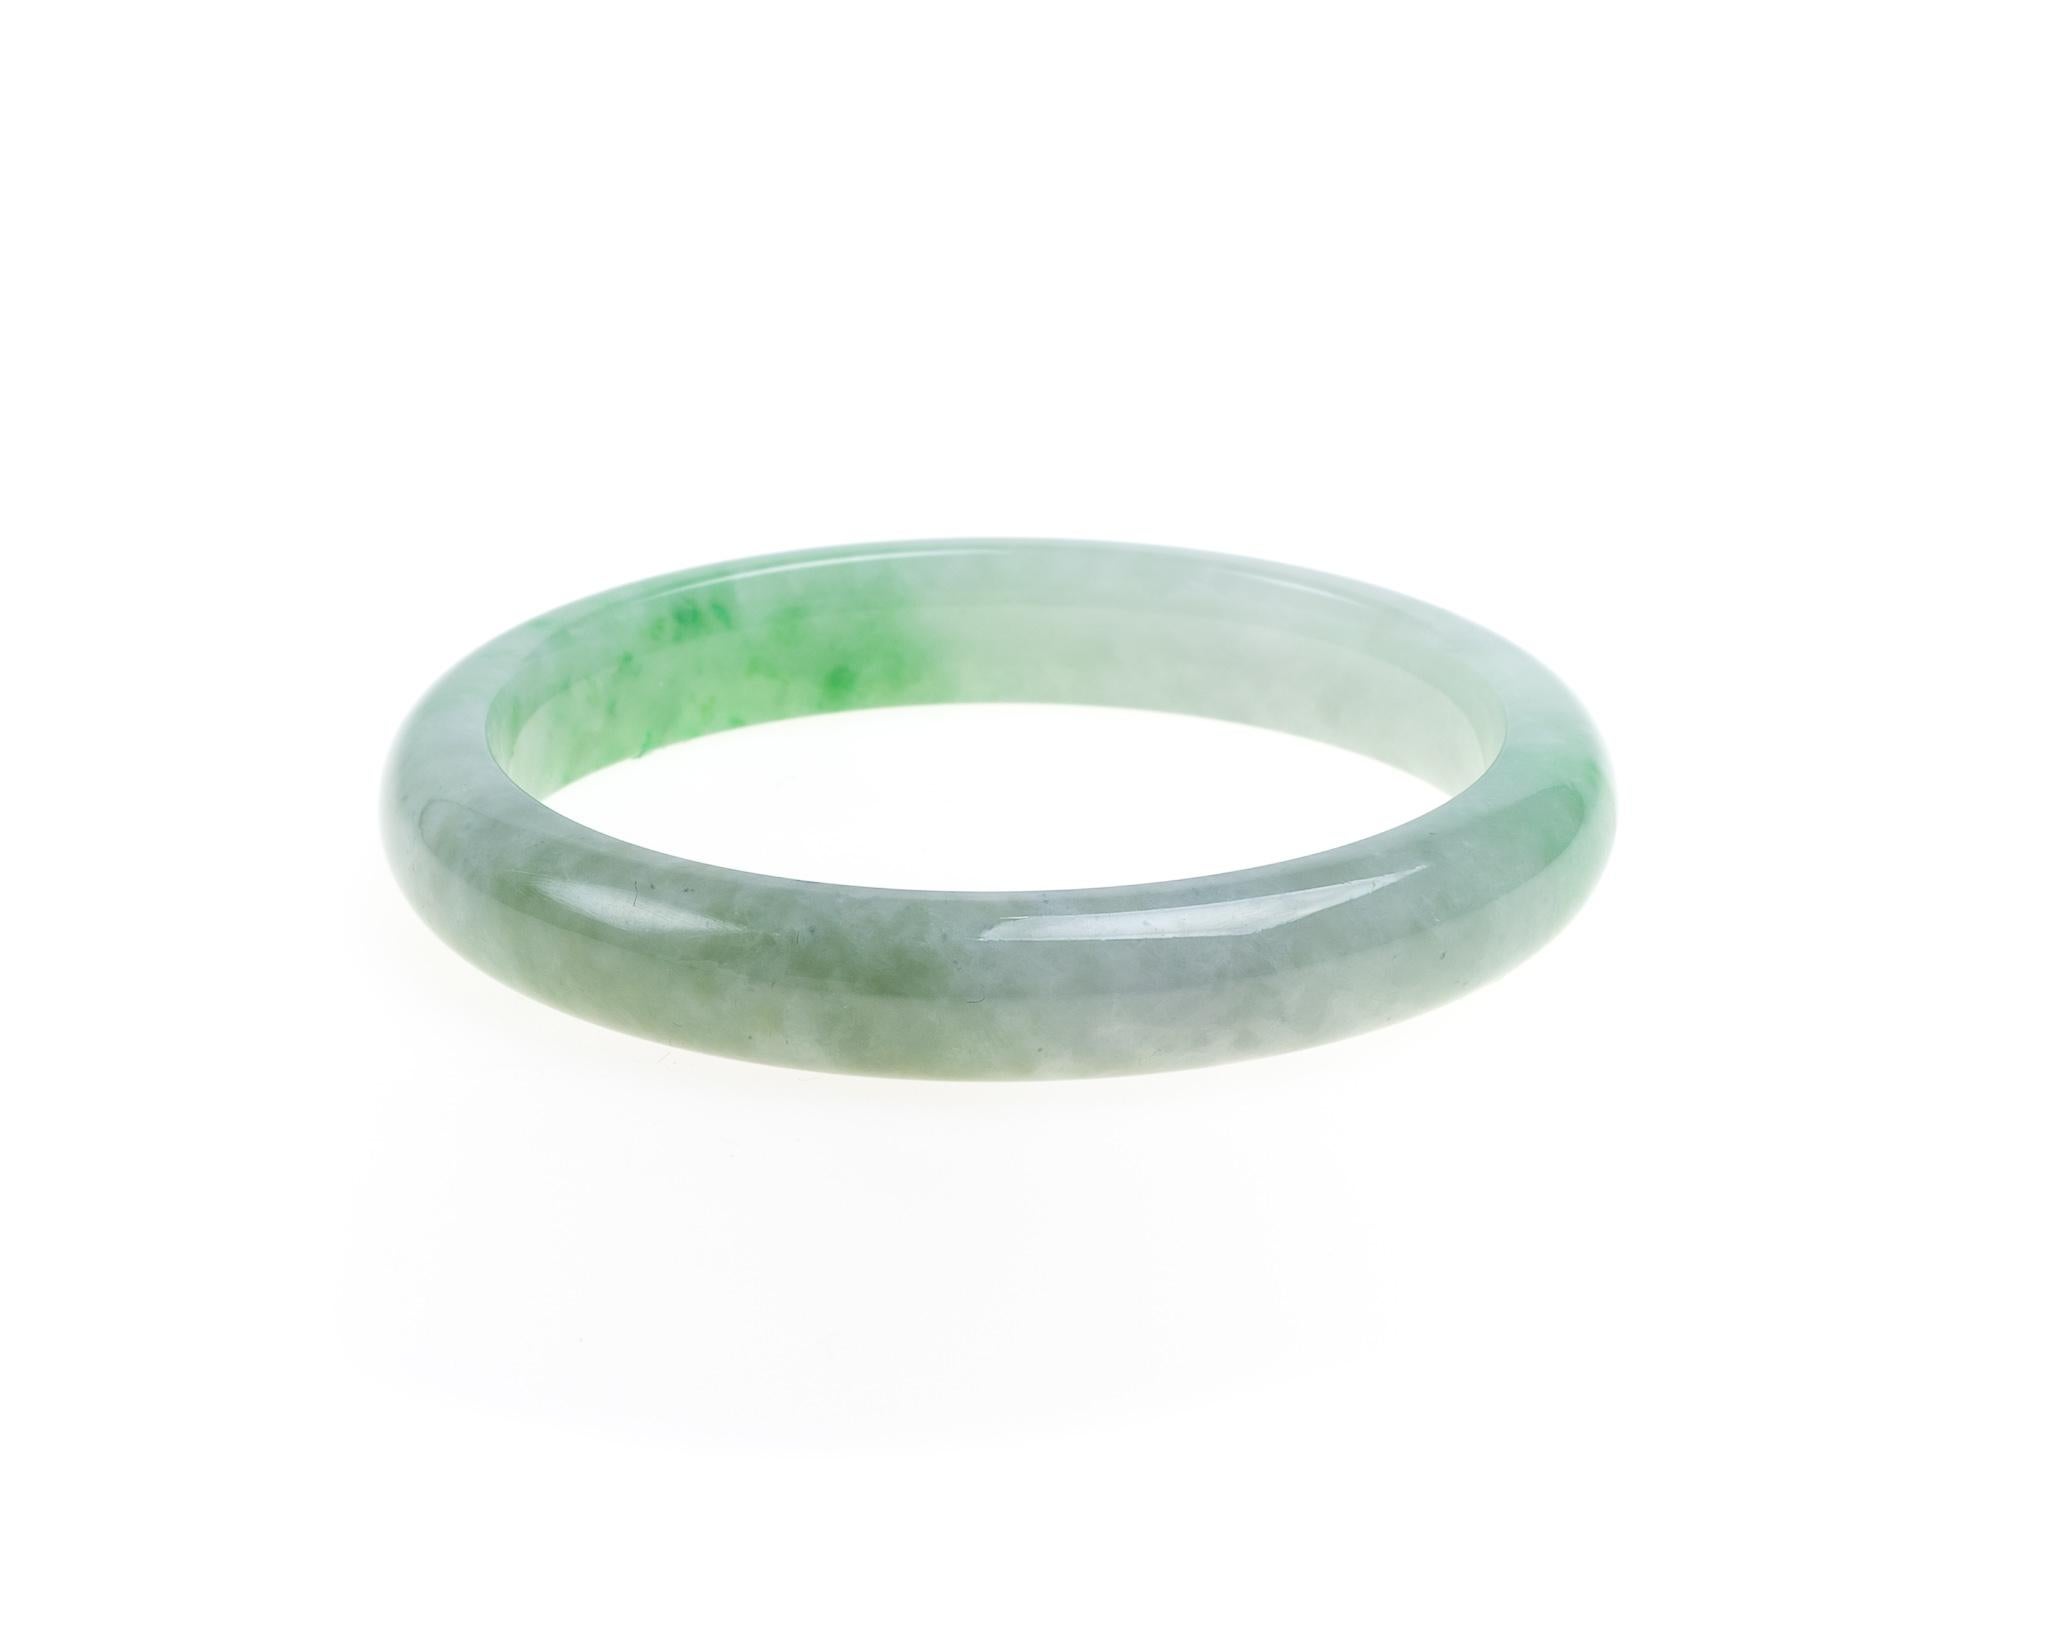 This all natural, untreated, type A, fei cui jadeite jade bangle with green veins in size 59.7mm.  This bangle's inner diameter measures  2.35 inches (59.7mm) and outer diameter measures 2.94 inches (74.8mm) with bangle width of 0.42 inches (10.8mm)